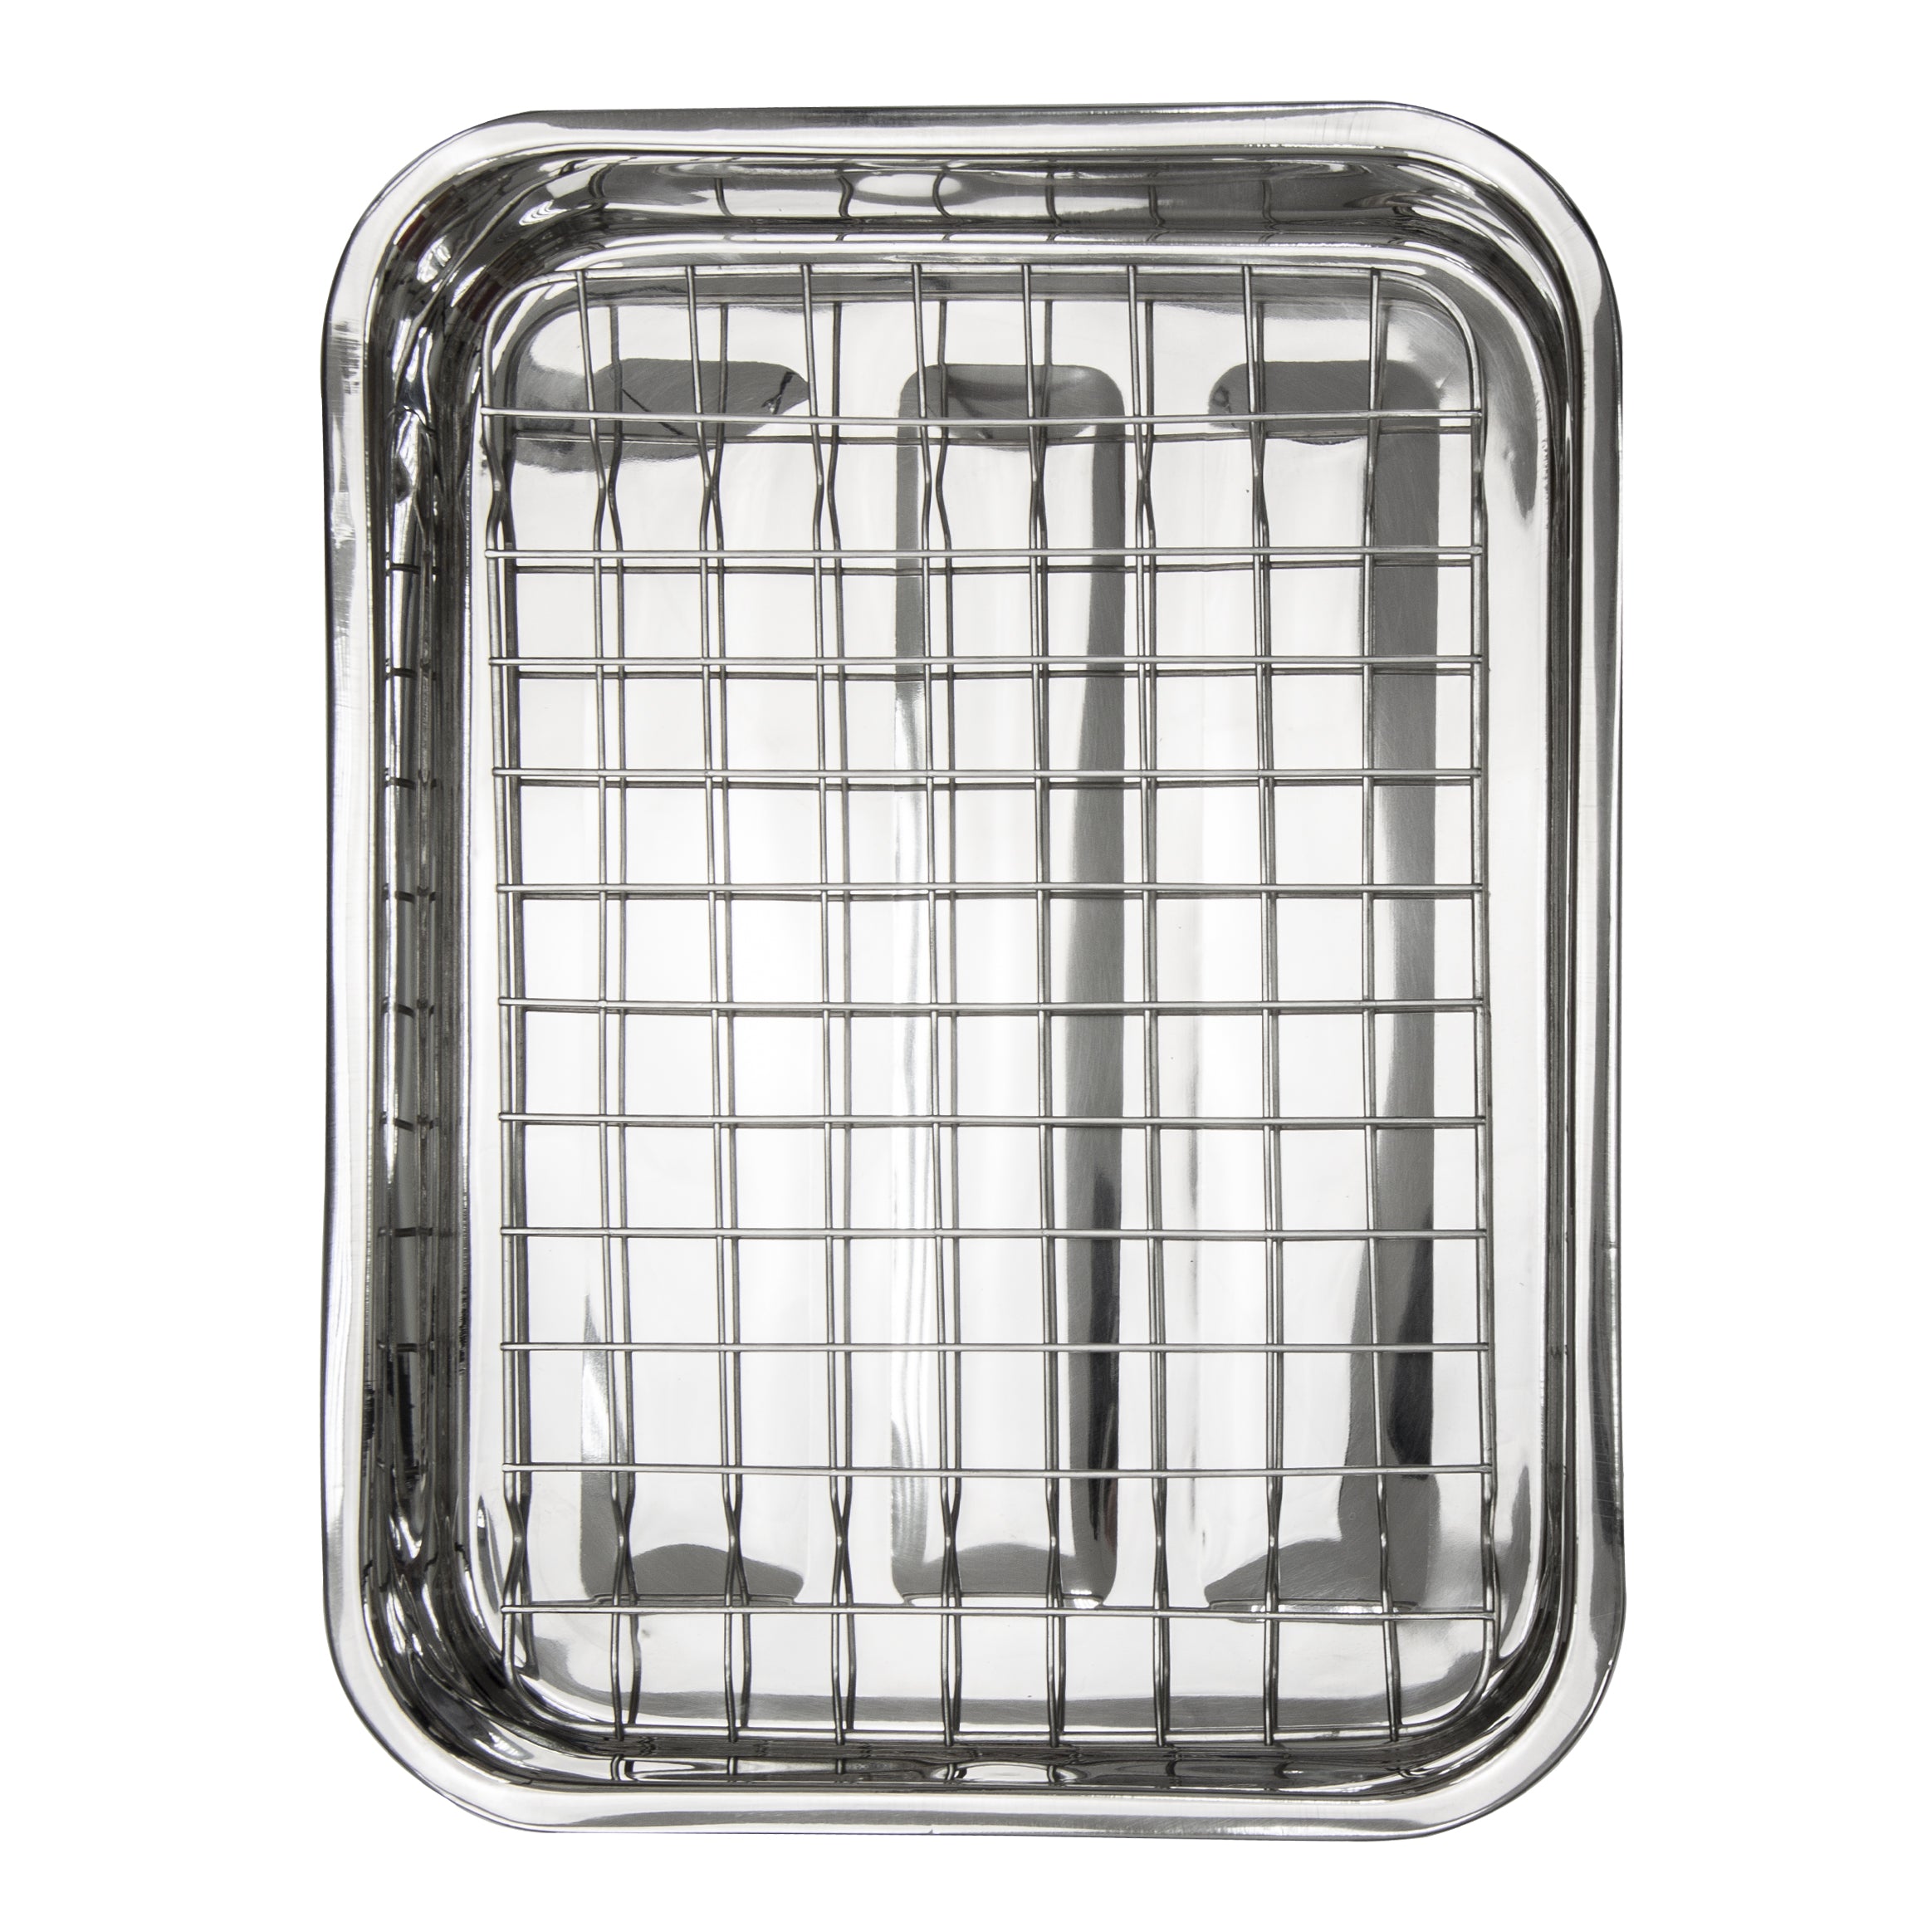 Stainless Steel Roasting Tray - With Rack/Grill - Large